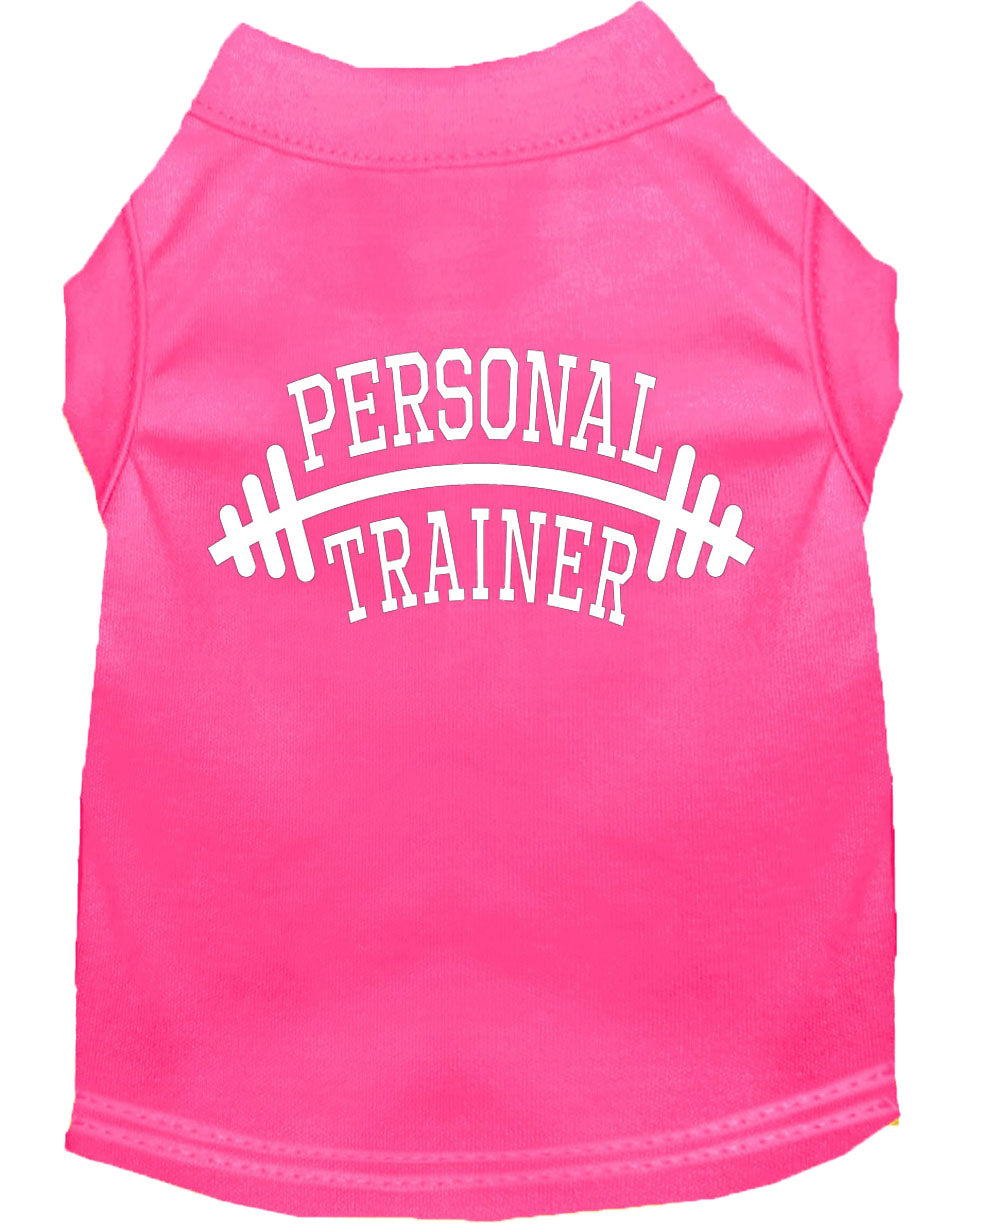 Personal Trainer